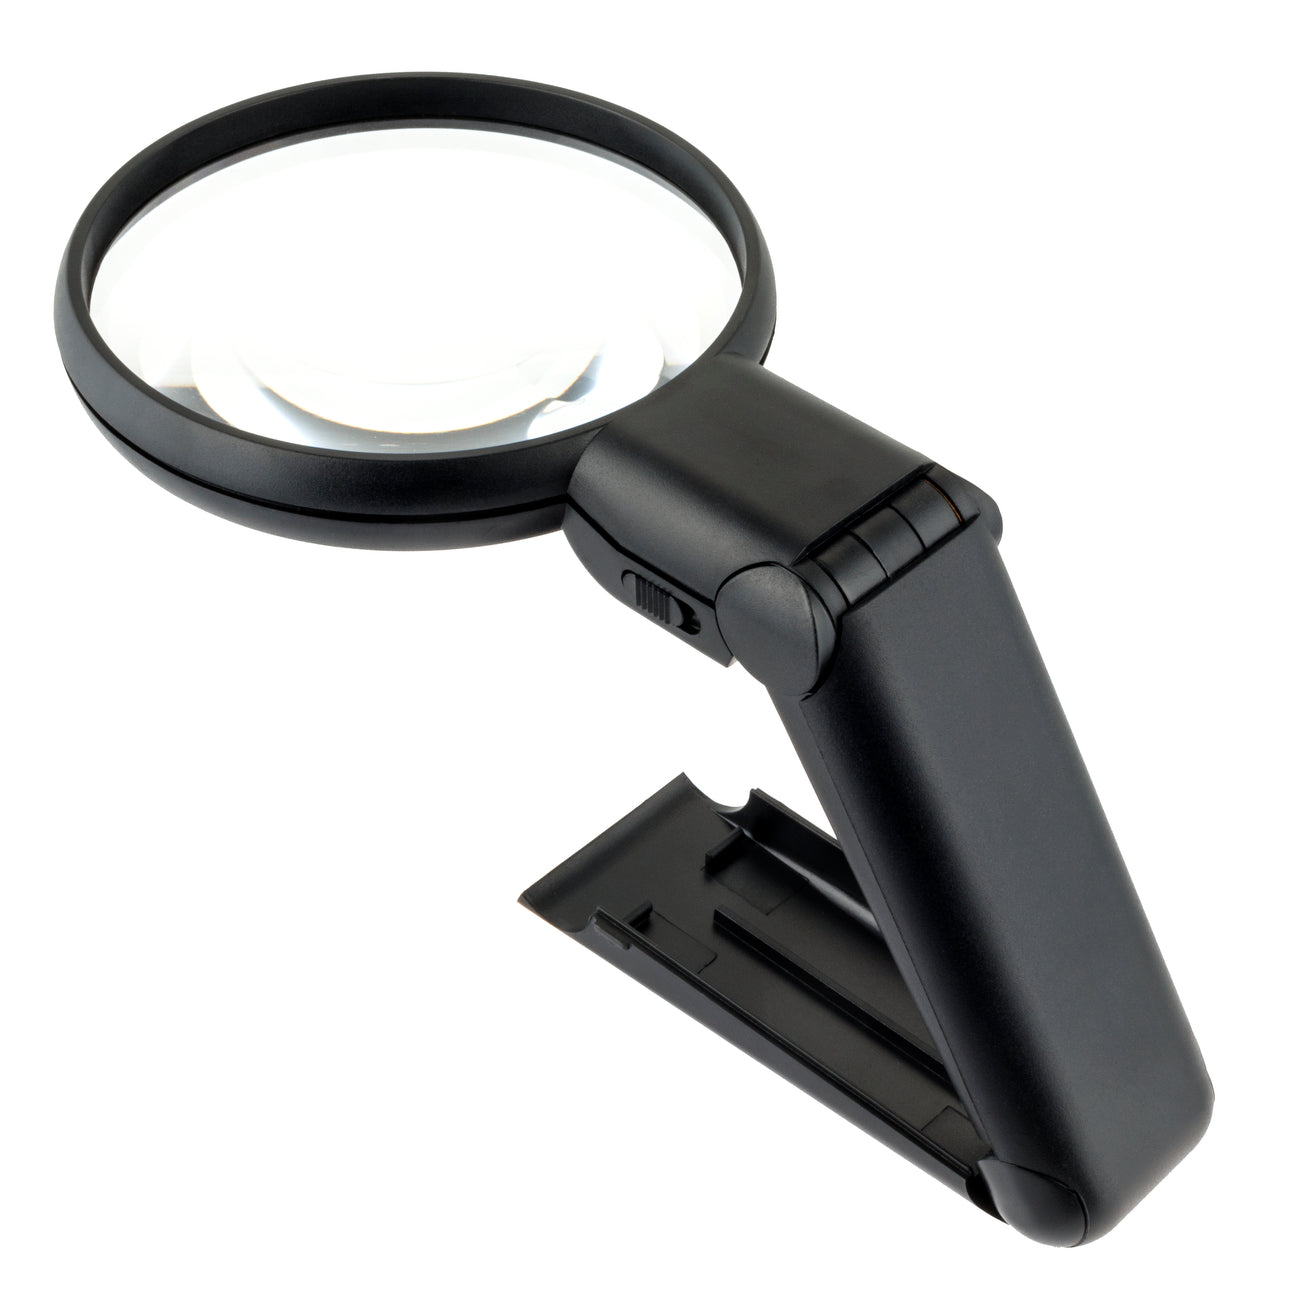 Lighted Hands Free Magnifier